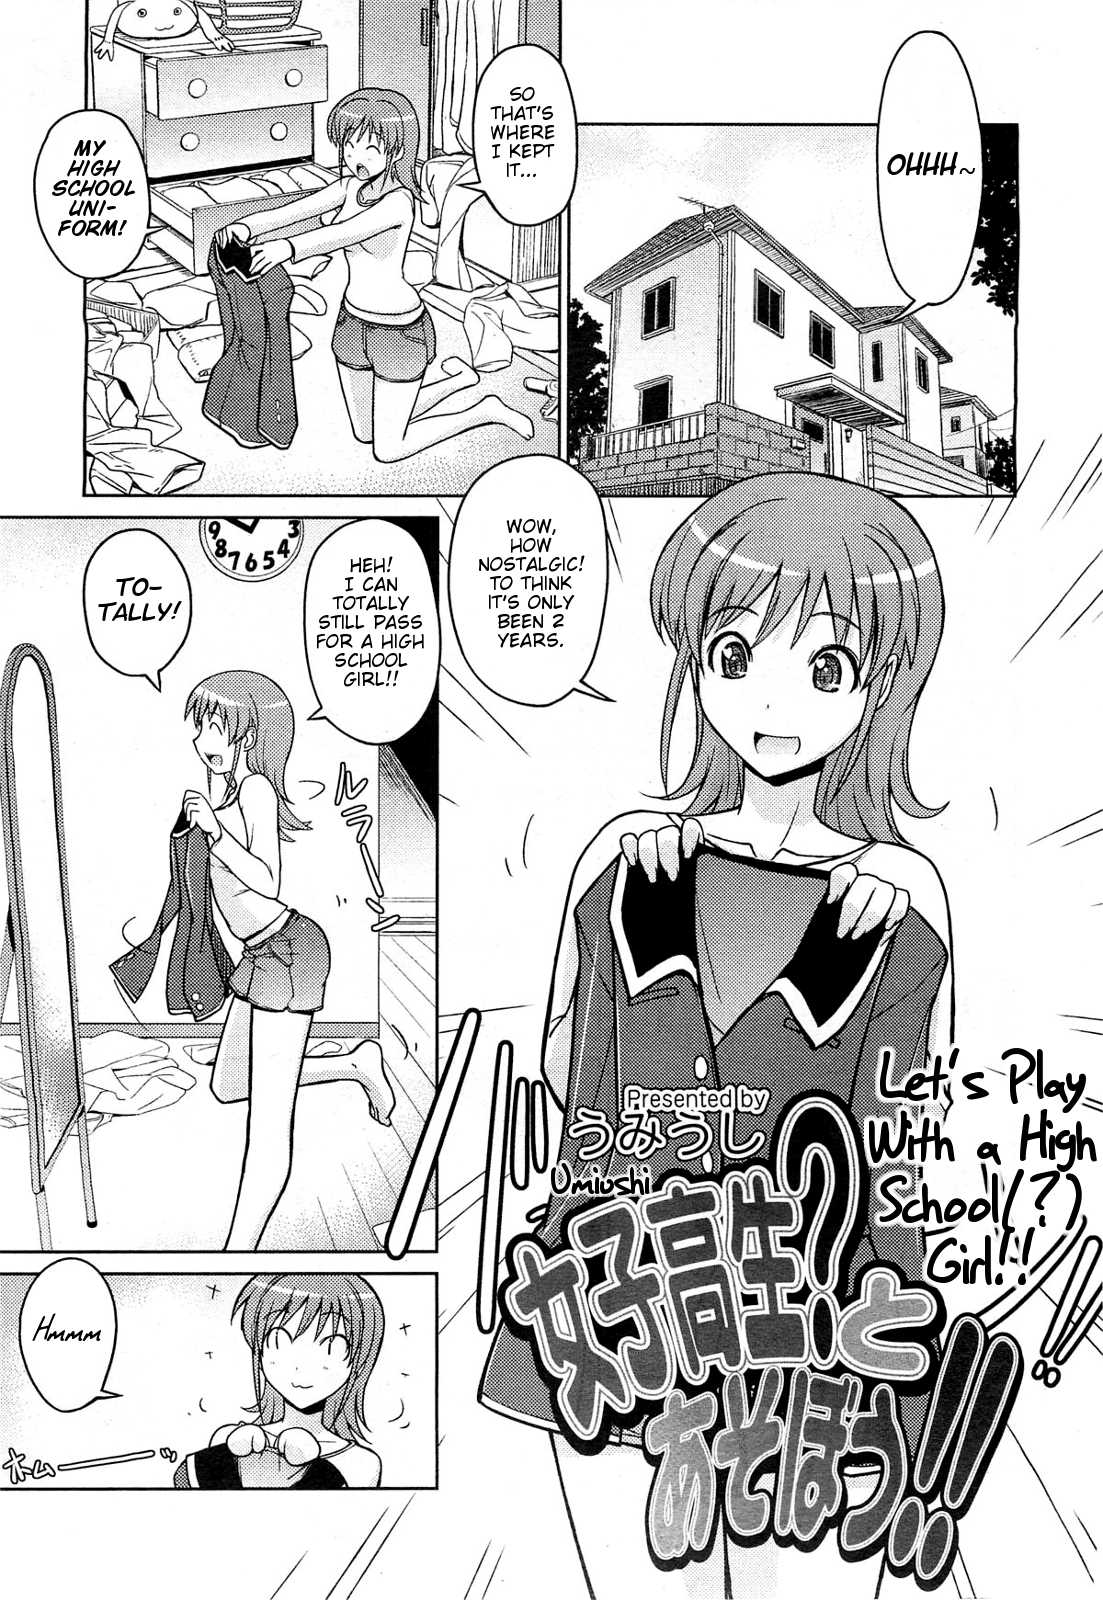 [Umiushi] Let&#039;s Play With a High School (?) Girl!! [English] =TV+L4K= 